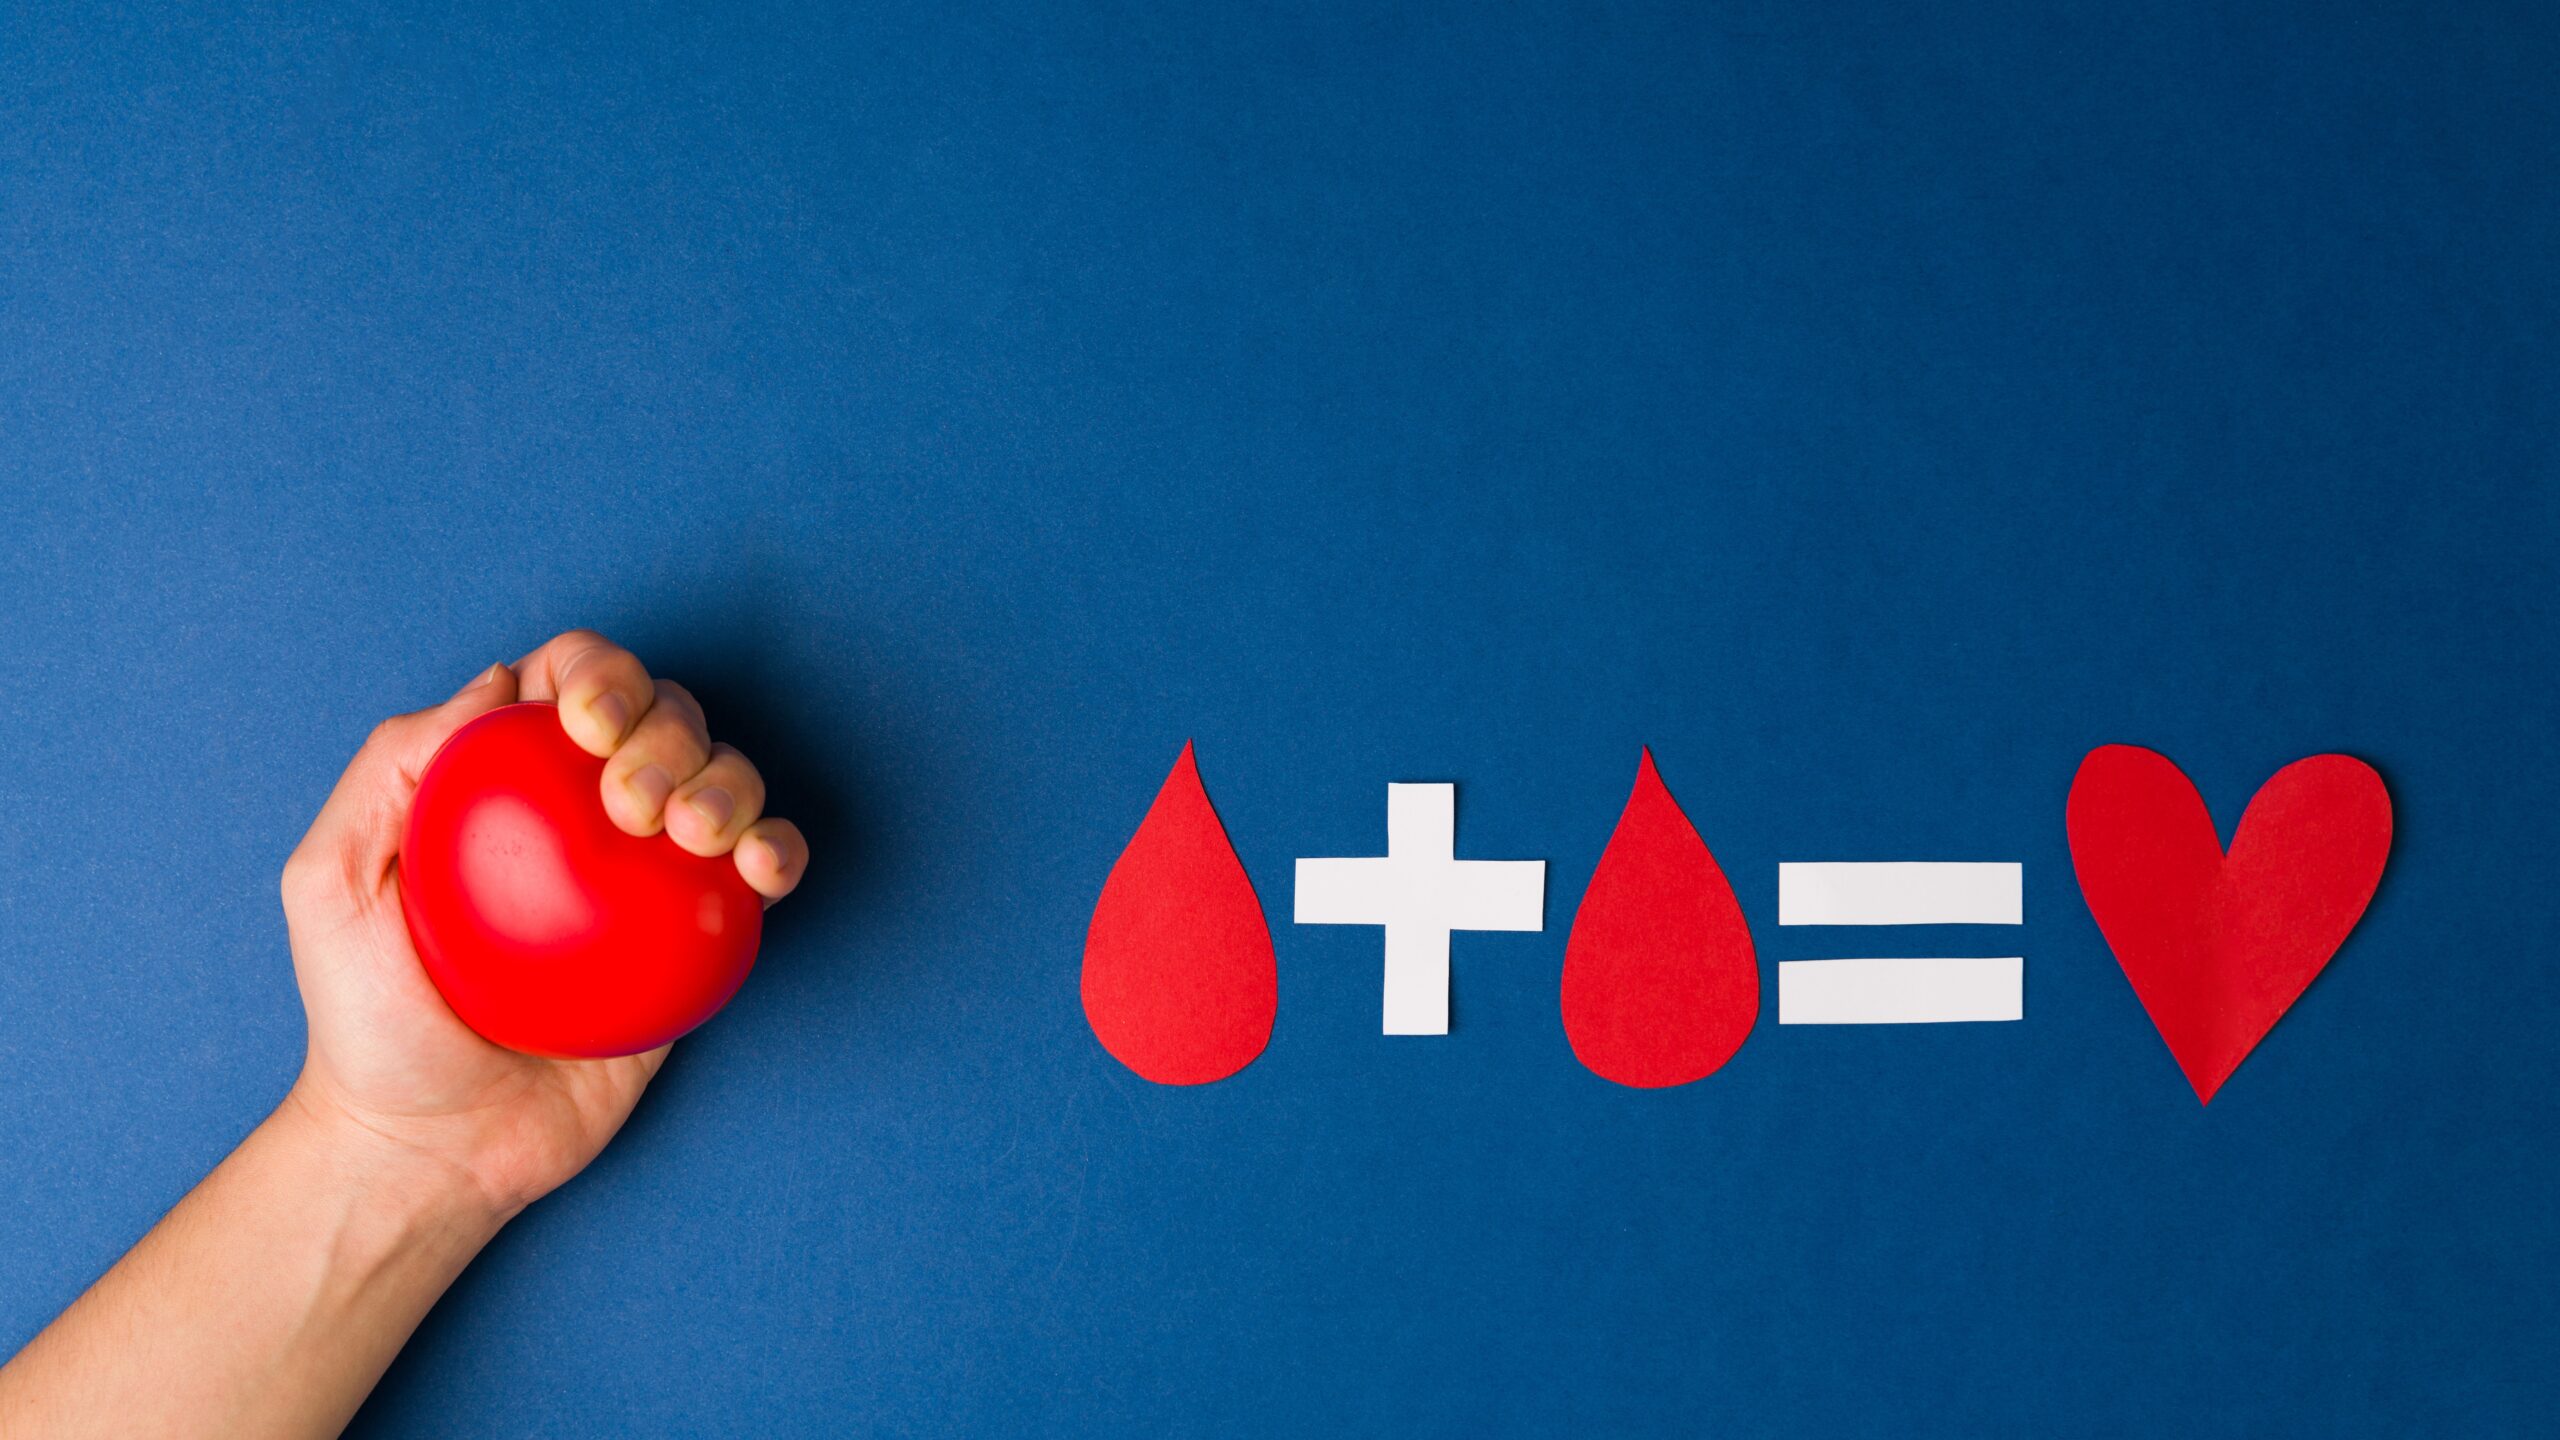 hand holding a heart shaped stress ball, next to a red blood droplet graphic on a blue background